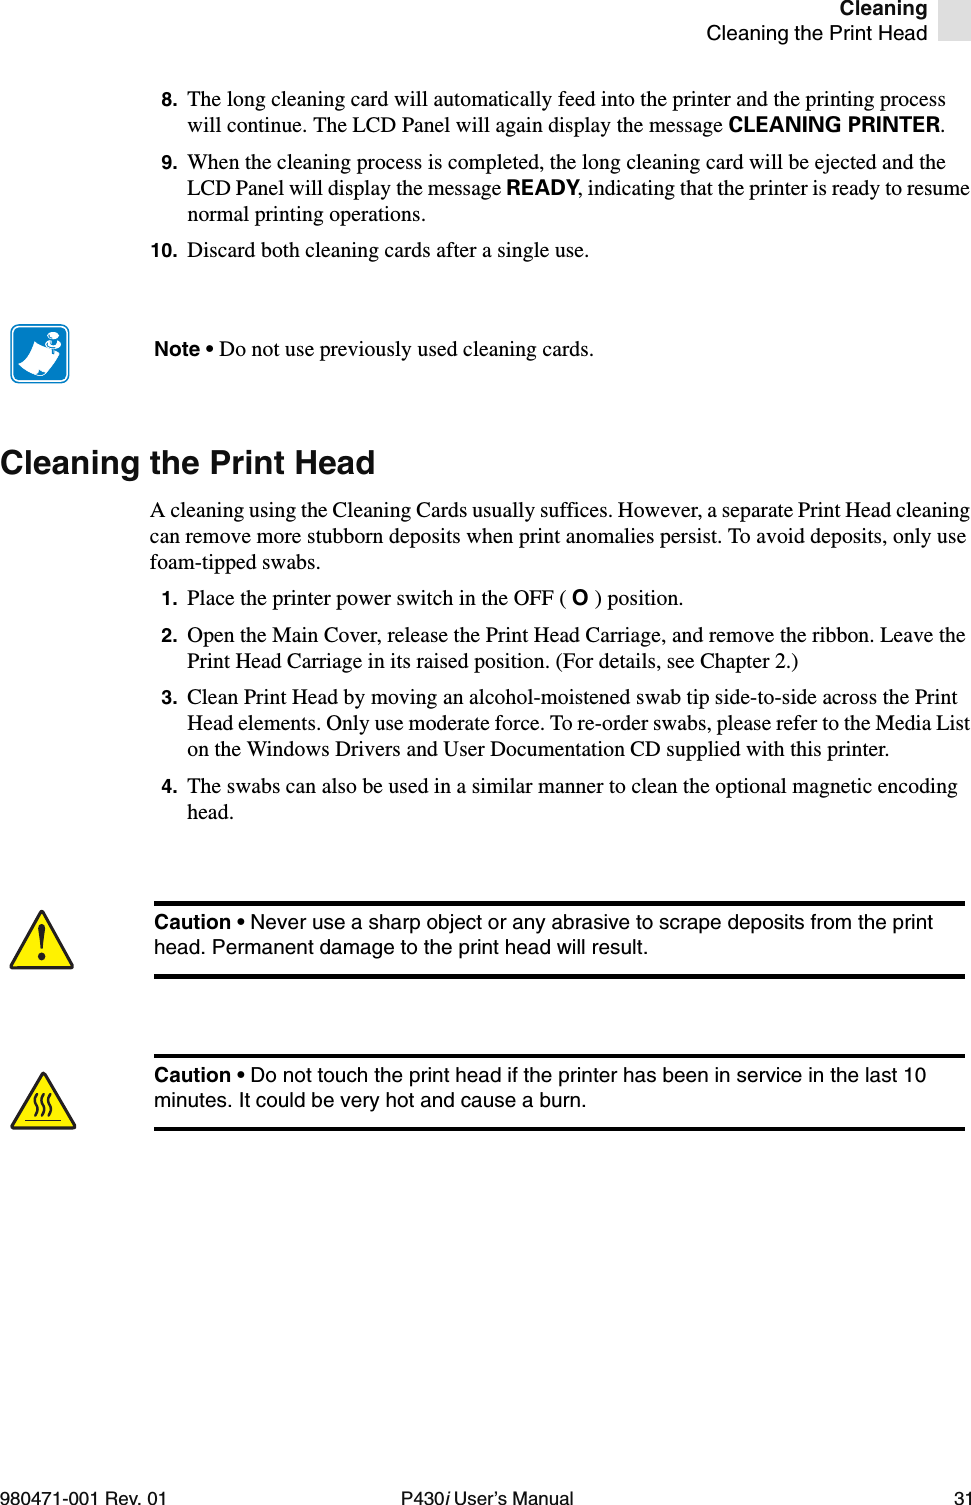 CleaningCleaning the Print Head980471-001 Rev. 01 P430i User’s Manual 318. The long cleaning card will automatically feed into the printer and the printing process will continue. The LCD Panel will again display the message CLEANING PRINTER.9. When the cleaning process is completed, the long cleaning card will be ejected and the LCD Panel will display the message READY, indicating that the printer is ready to resume normal printing operations.10. Discard both cleaning cards after a single use.Cleaning the Print HeadA cleaning using the Cleaning Cards usually suffices. However, a separate Print Head cleaning can remove more stubborn deposits when print anomalies persist. To avoid deposits, only use foam-tipped swabs.1. Place the printer power switch in the OFF ( O ) position.2. Open the Main Cover, release the Print Head Carriage, and remove the ribbon. Leave the Print Head Carriage in its raised position. (For details, see Chapter 2.)3. Clean Print Head by moving an alcohol-moistened swab tip side-to-side across the Print Head elements. Only use moderate force. To re-order swabs, please refer to the Media List on the Windows Drivers and User Documentation CD supplied with this printer.4. The swabs can also be used in a similar manner to clean the optional magnetic encoding head.Note • Do not use previously used cleaning cards.Caution • Never use a sharp object or any abrasive to scrape deposits from the print head. Permanent damage to the print head will result.Caution • Do not touch the print head if the printer has been in service in the last 10 minutes. It could be very hot and cause a burn.